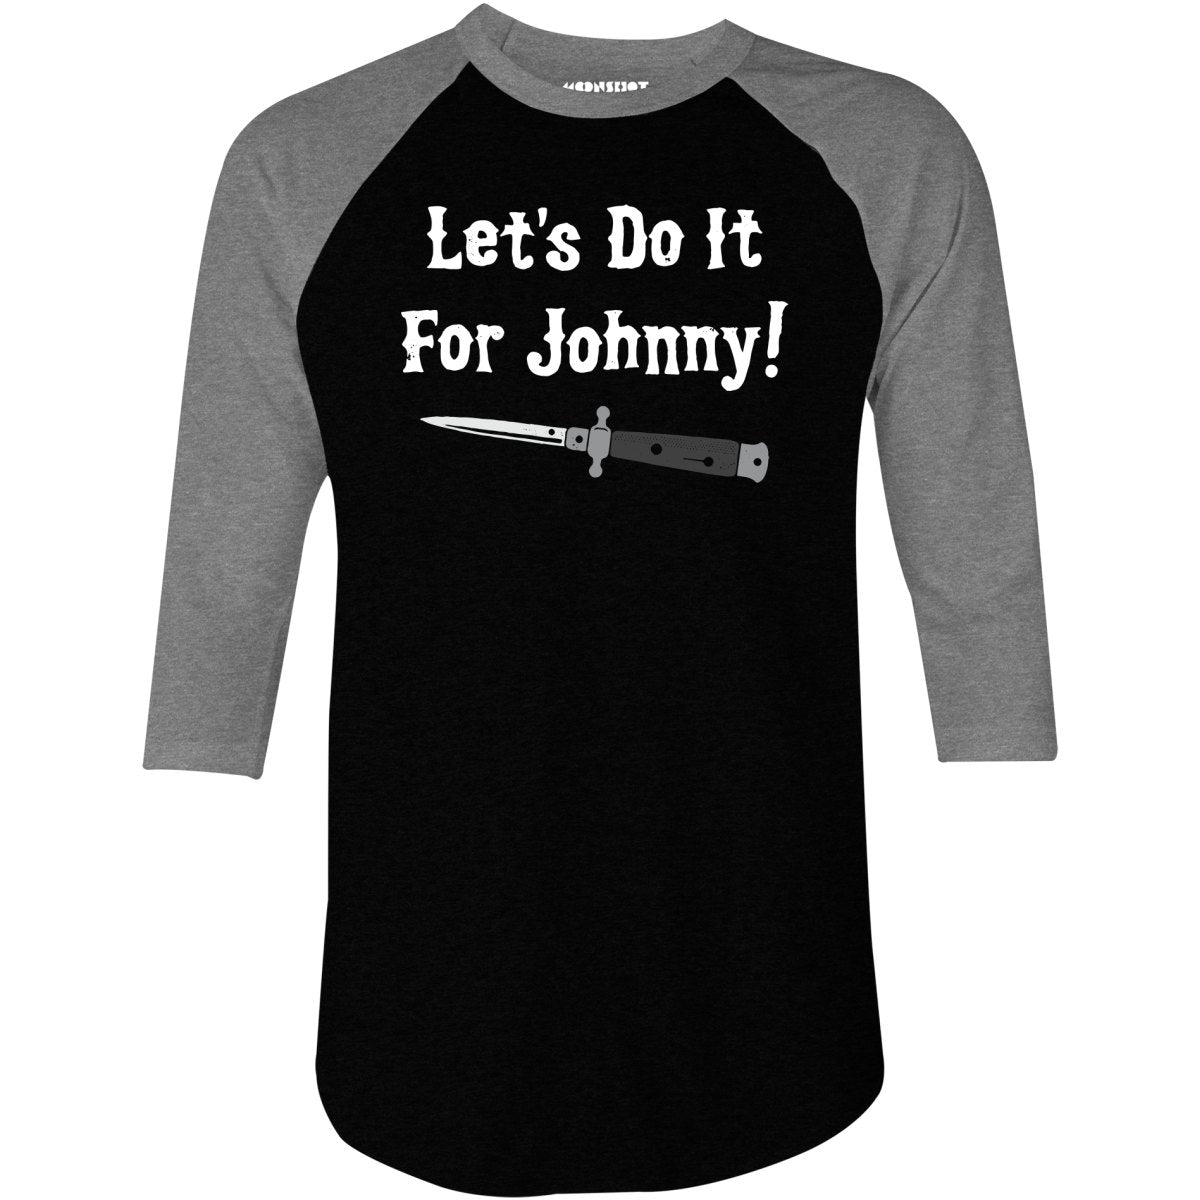 Let's Do it For Johnny - Outsiders - 3/4 Sleeve Raglan T-Shirt